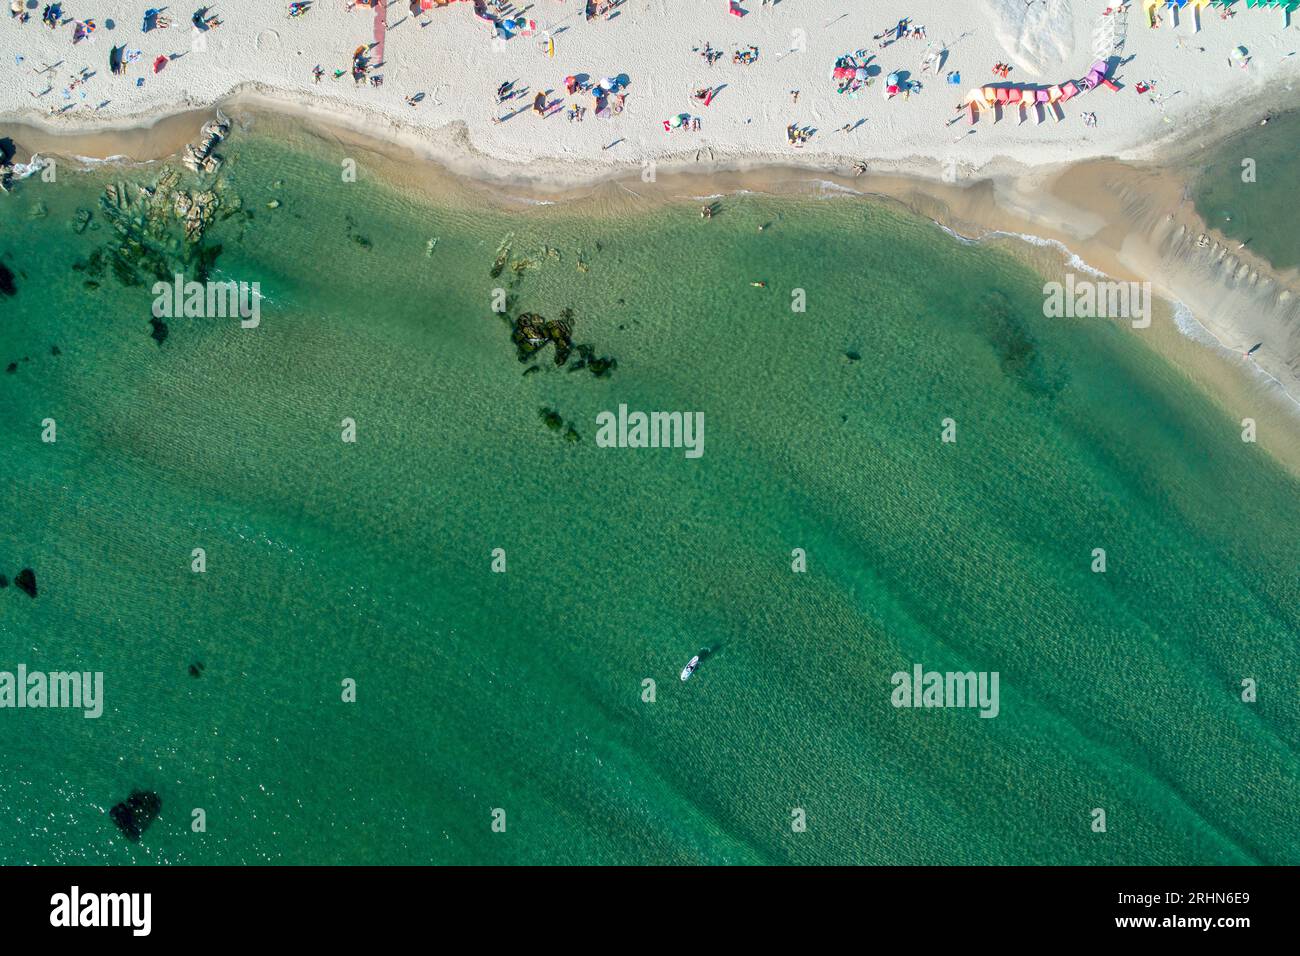 zenithal aerial view of a beach with people enjoying the summer Stock Photo